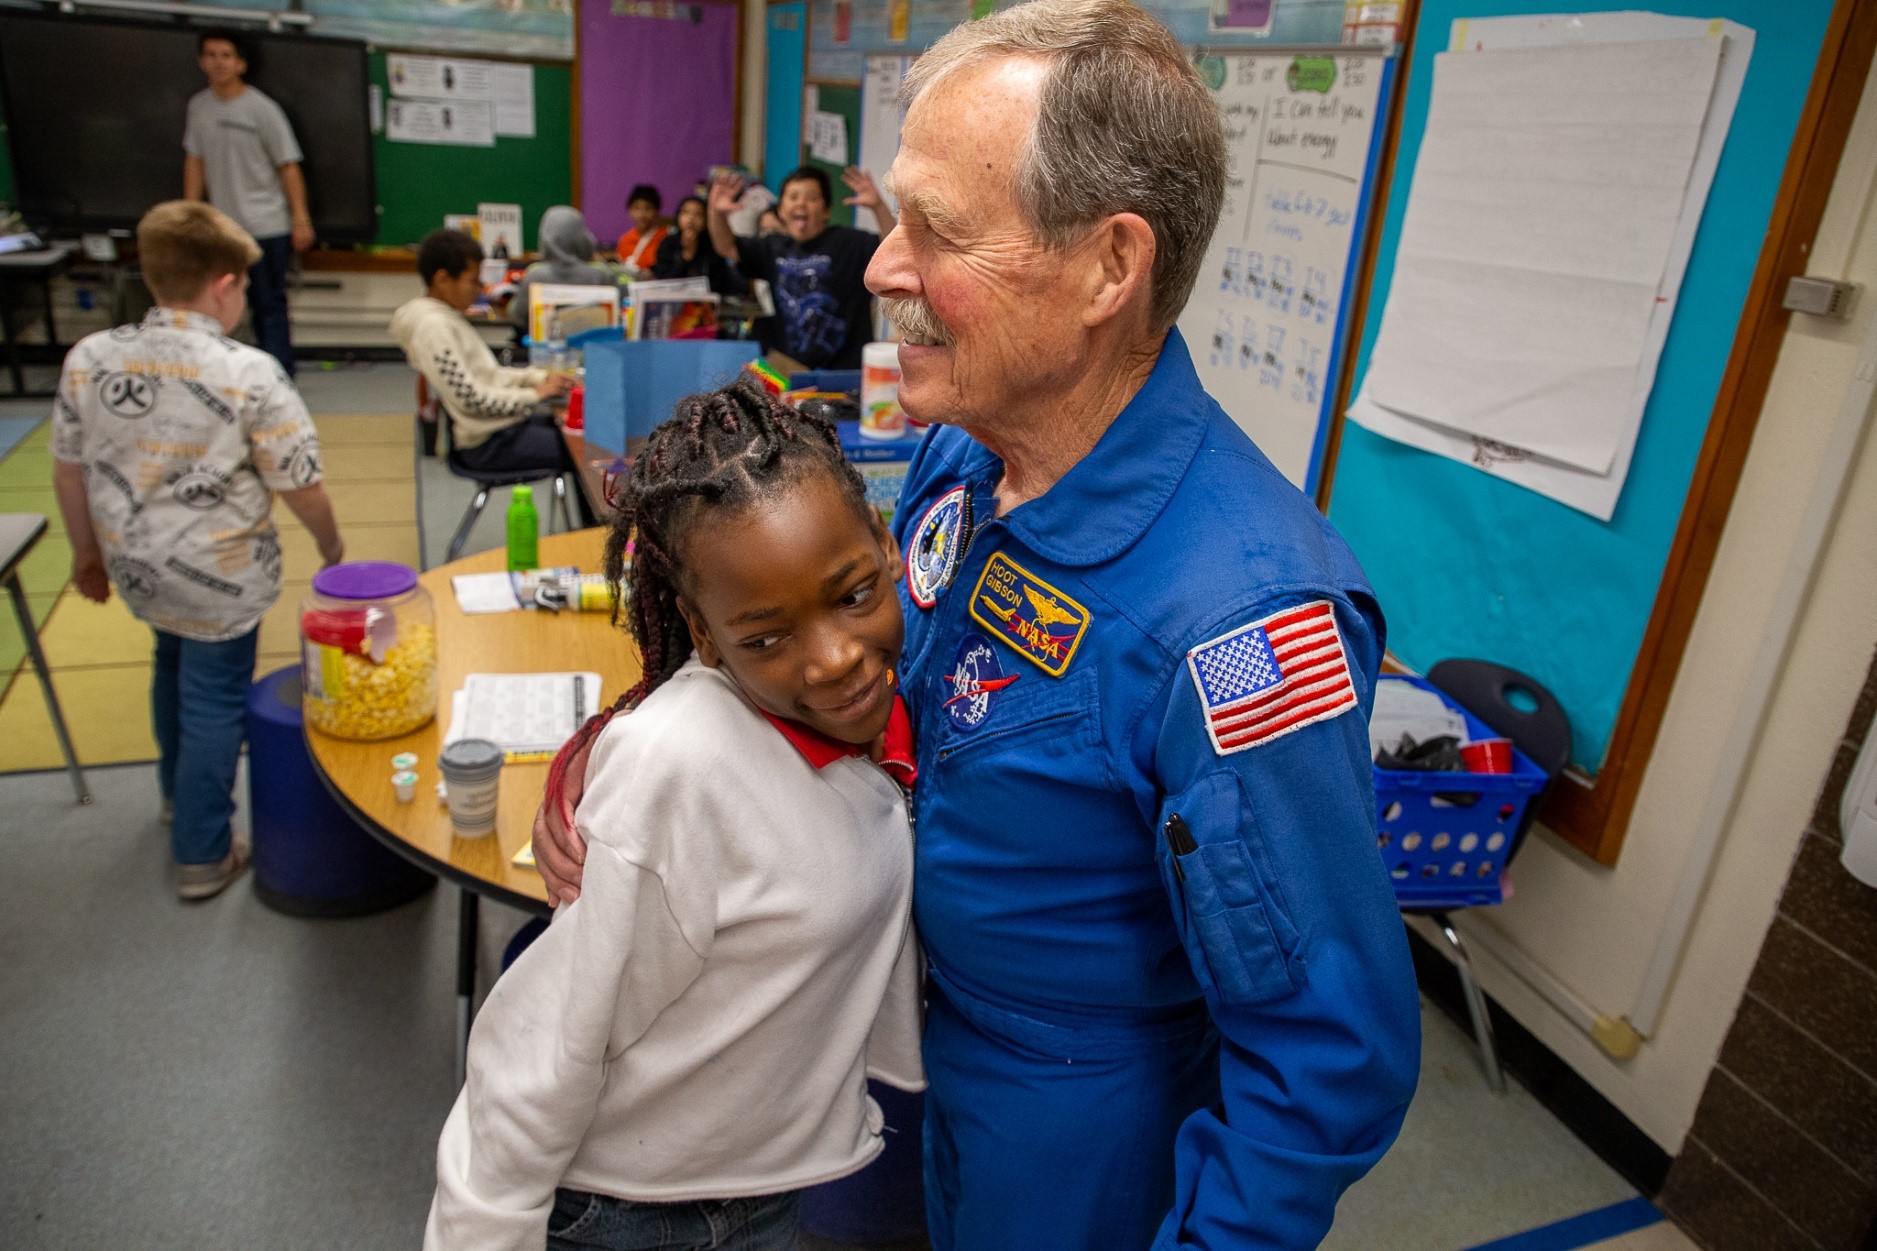 Former astronaut Hoot Gibson hugs a young girl after his presentation